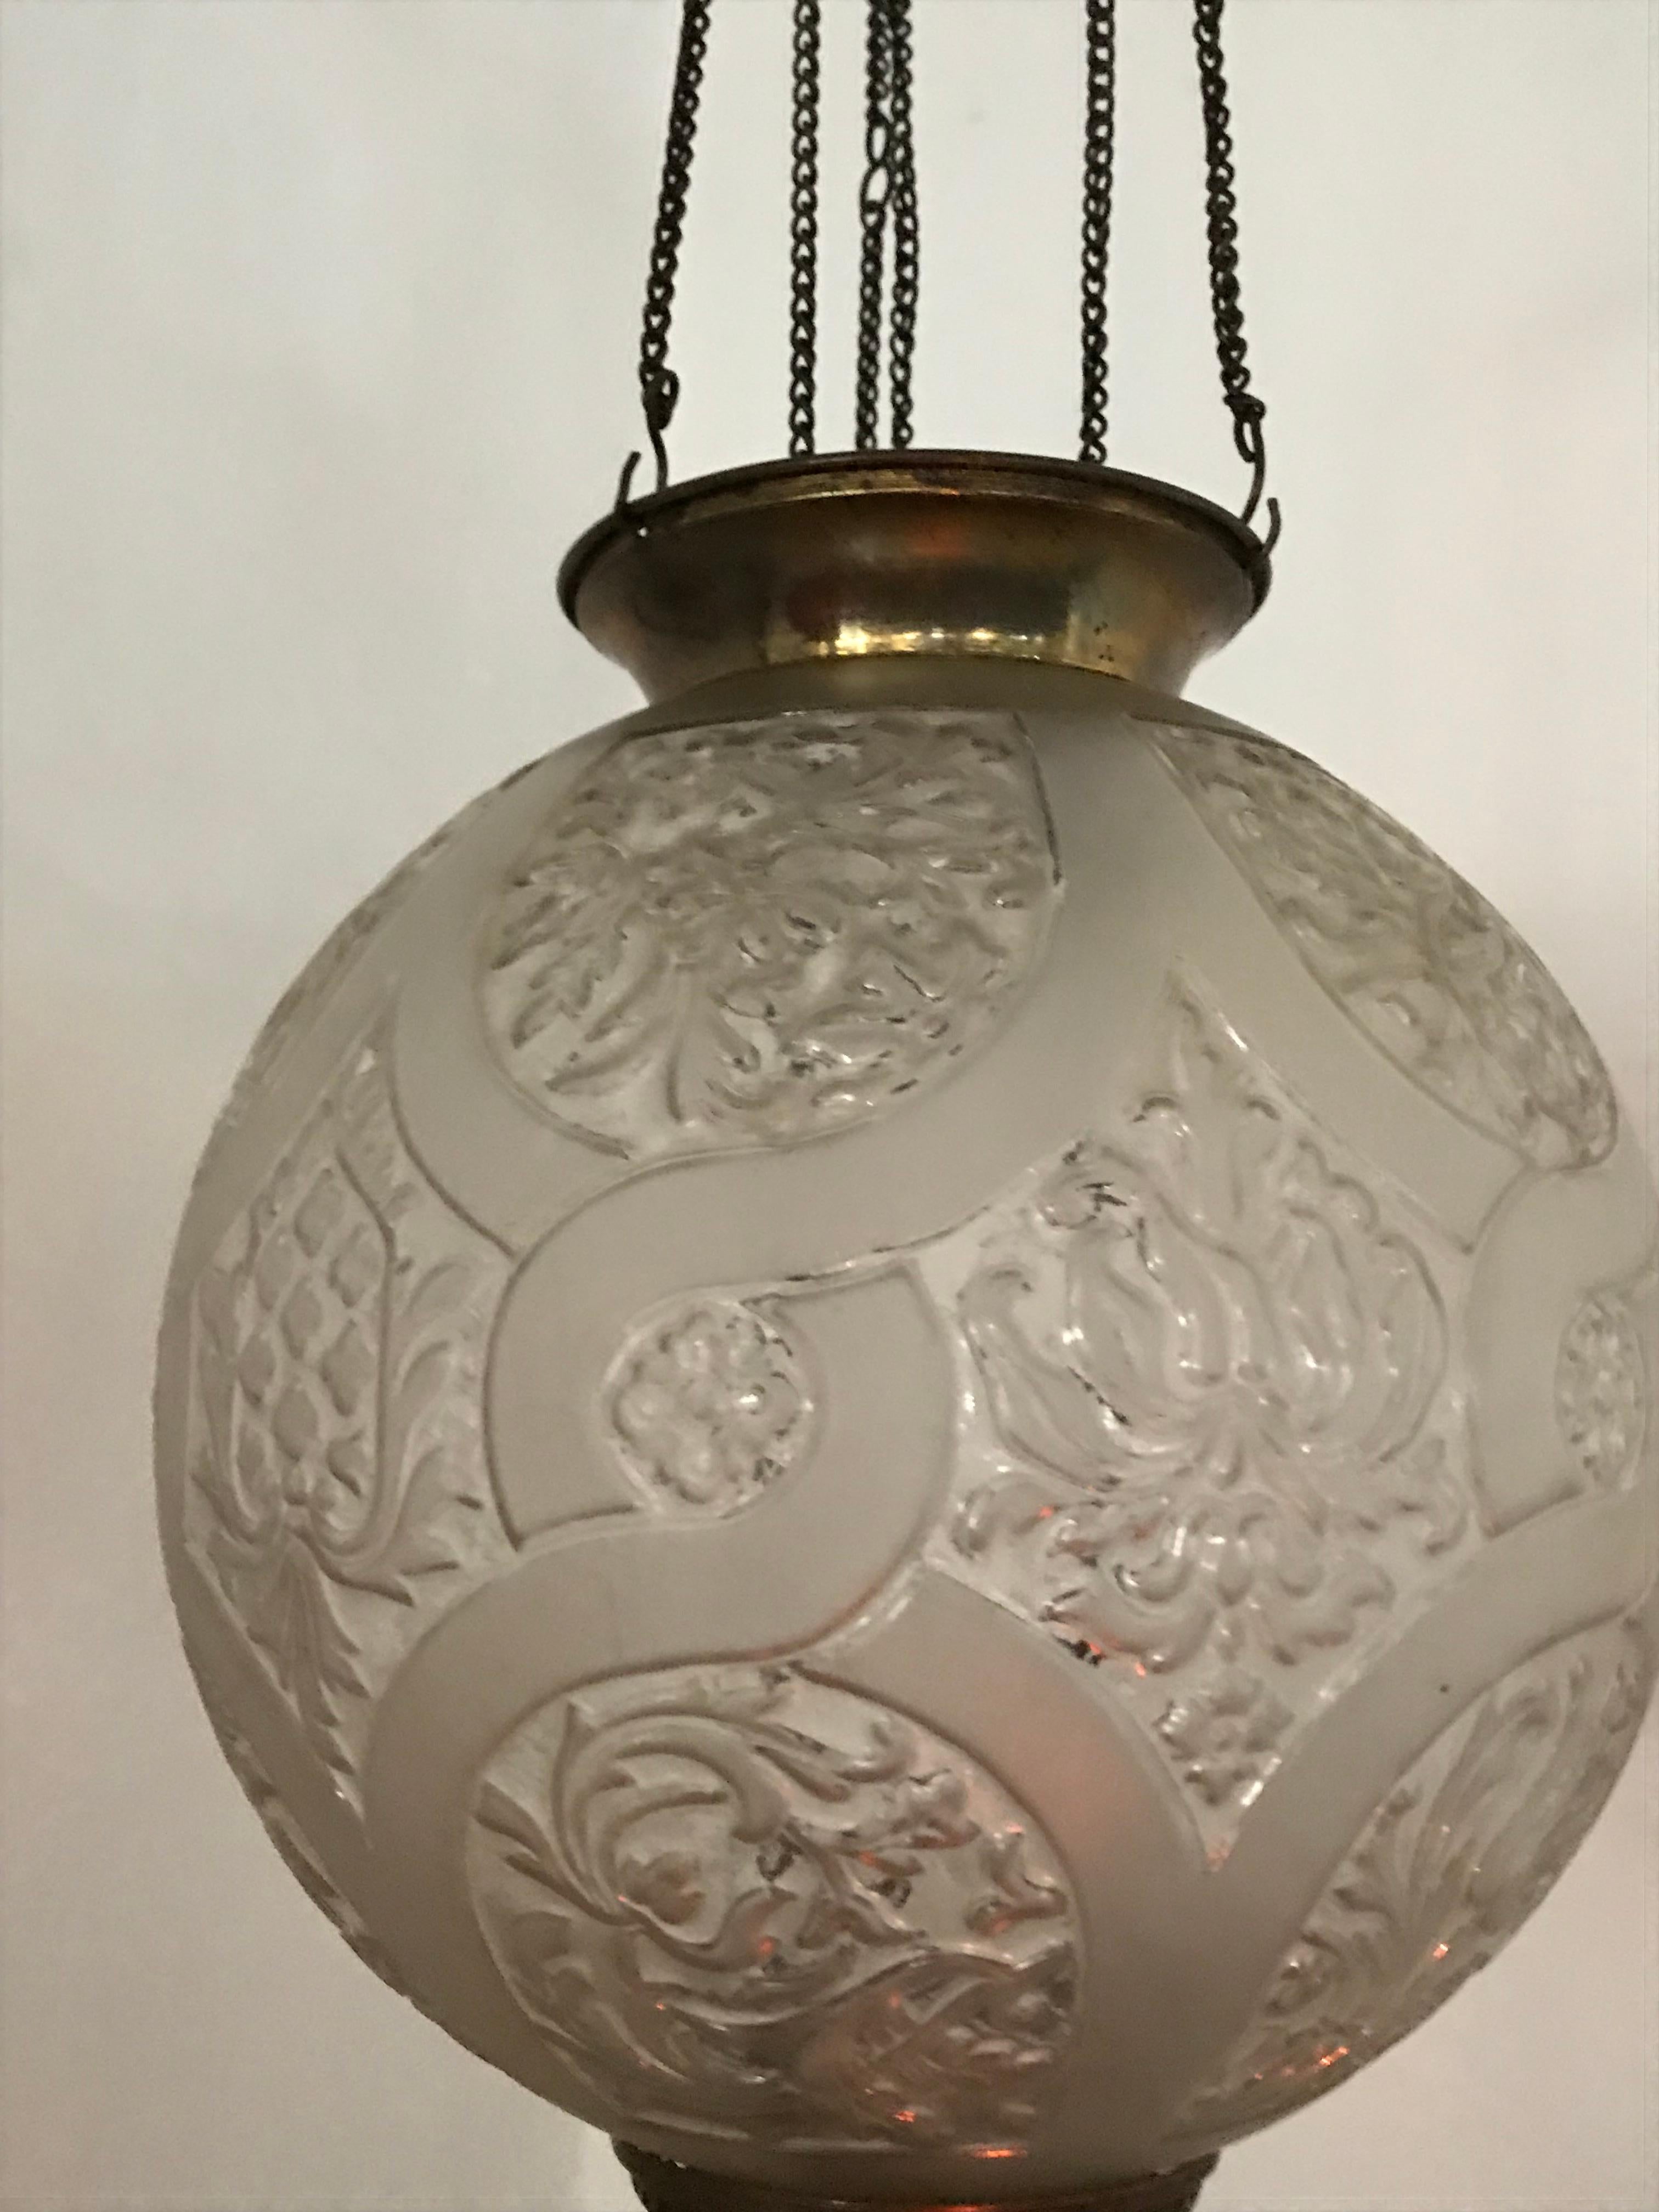 Late 19th Century Art Nouveau Candle Lantern by Baccarat, France, circa 1890-1920 For Sale